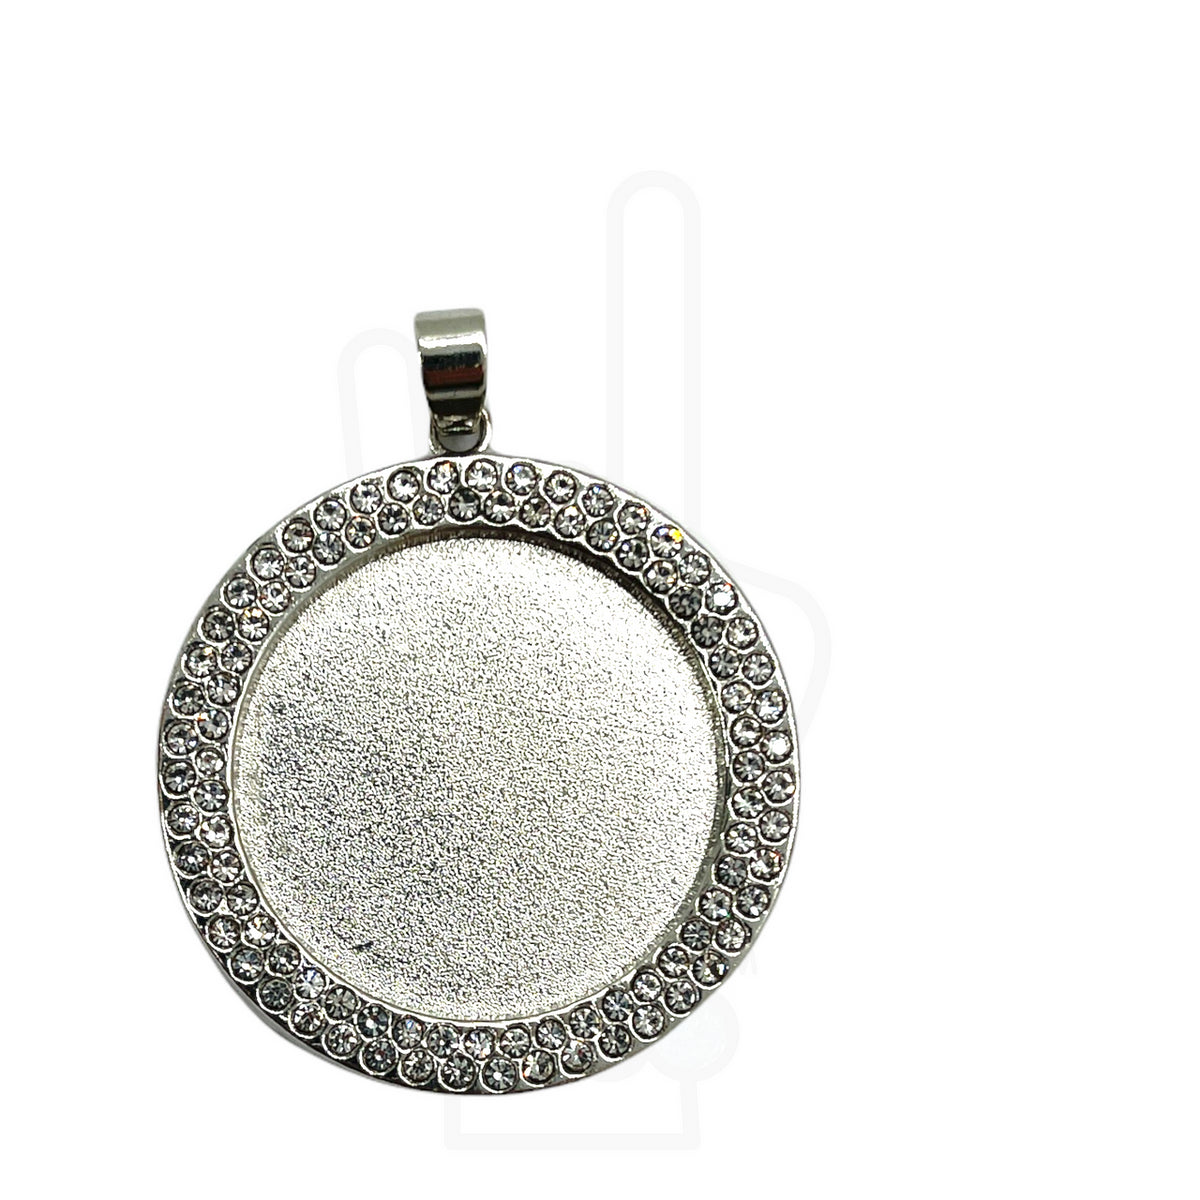 25mm Round Bezel with Rhinestones &amp; Pinch Clips Pendant Blank for UV or Epoxy Resin